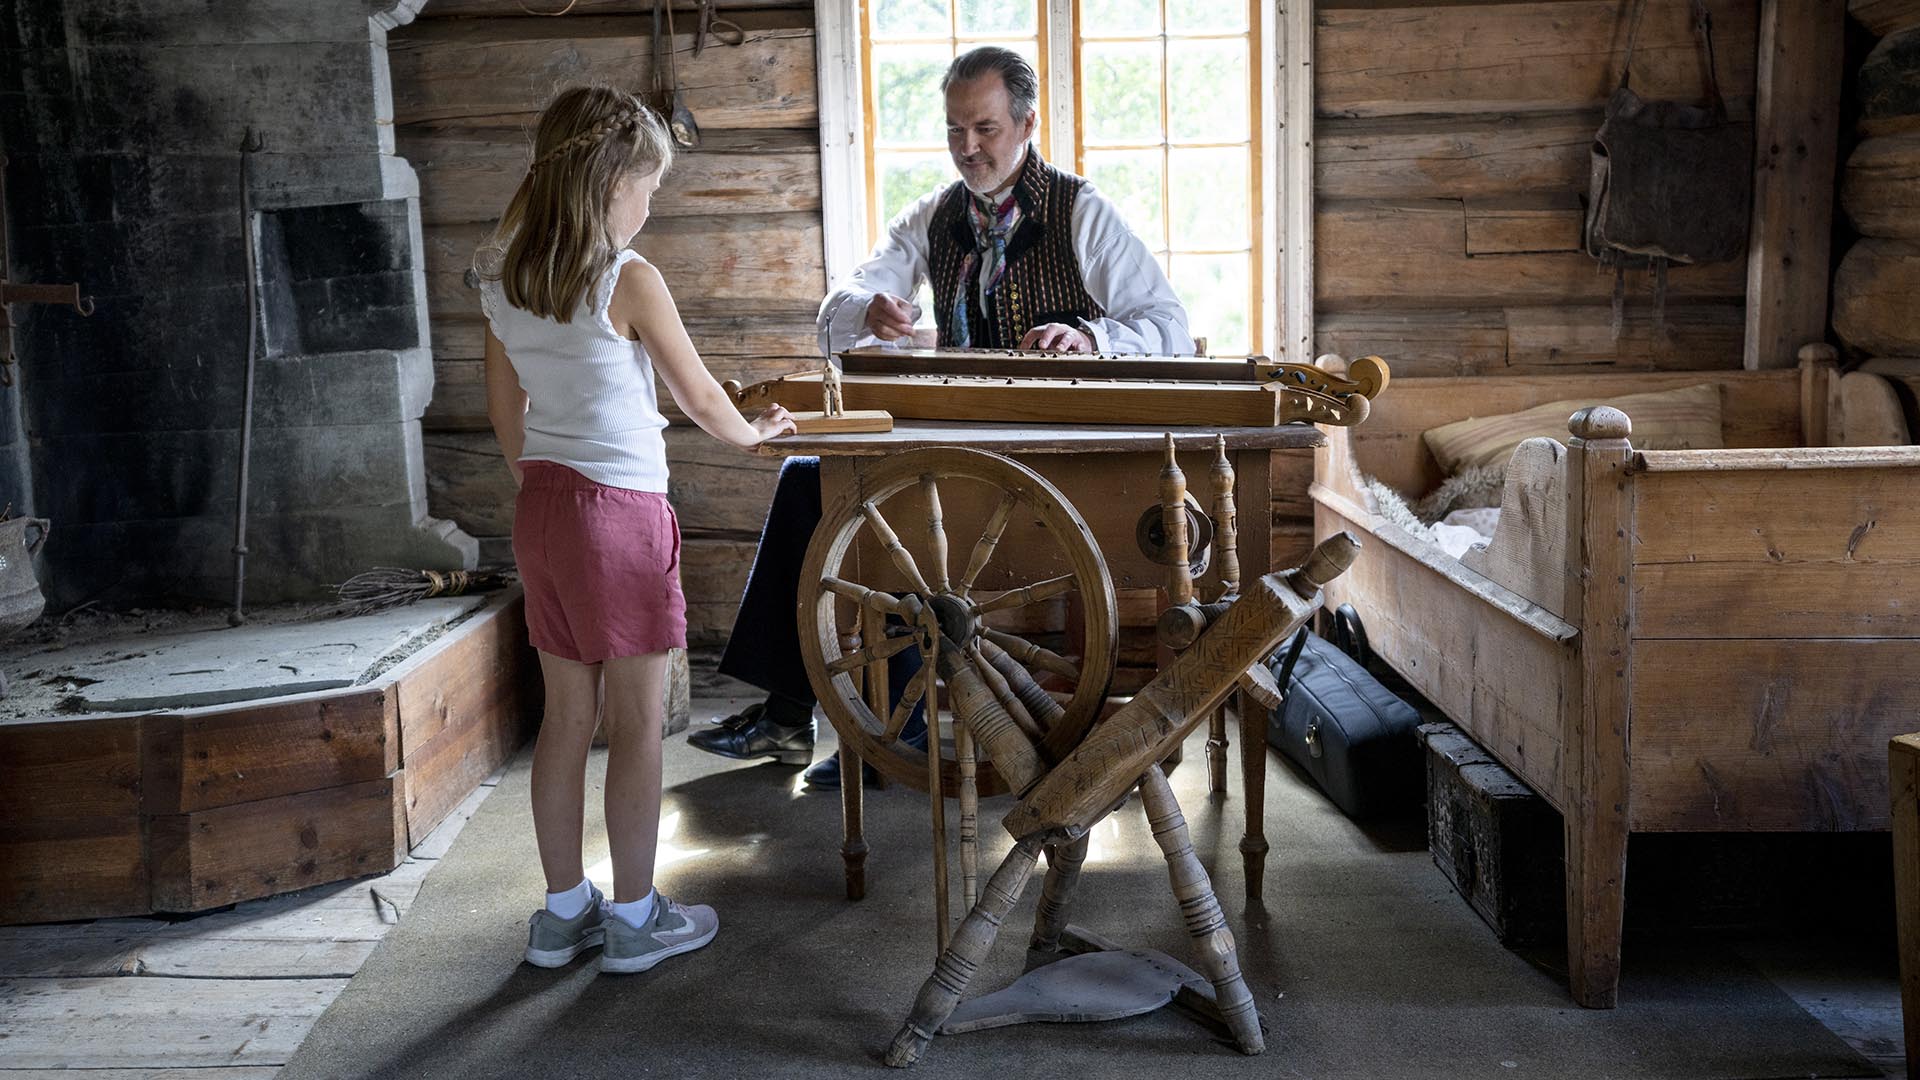 Inside one of the old houses at Valdres Folk Museum with a bed, a spinning wheel, a fire place and a man in folk costume who plays the langeleik, a kind of zither, while girl watches and listenes.